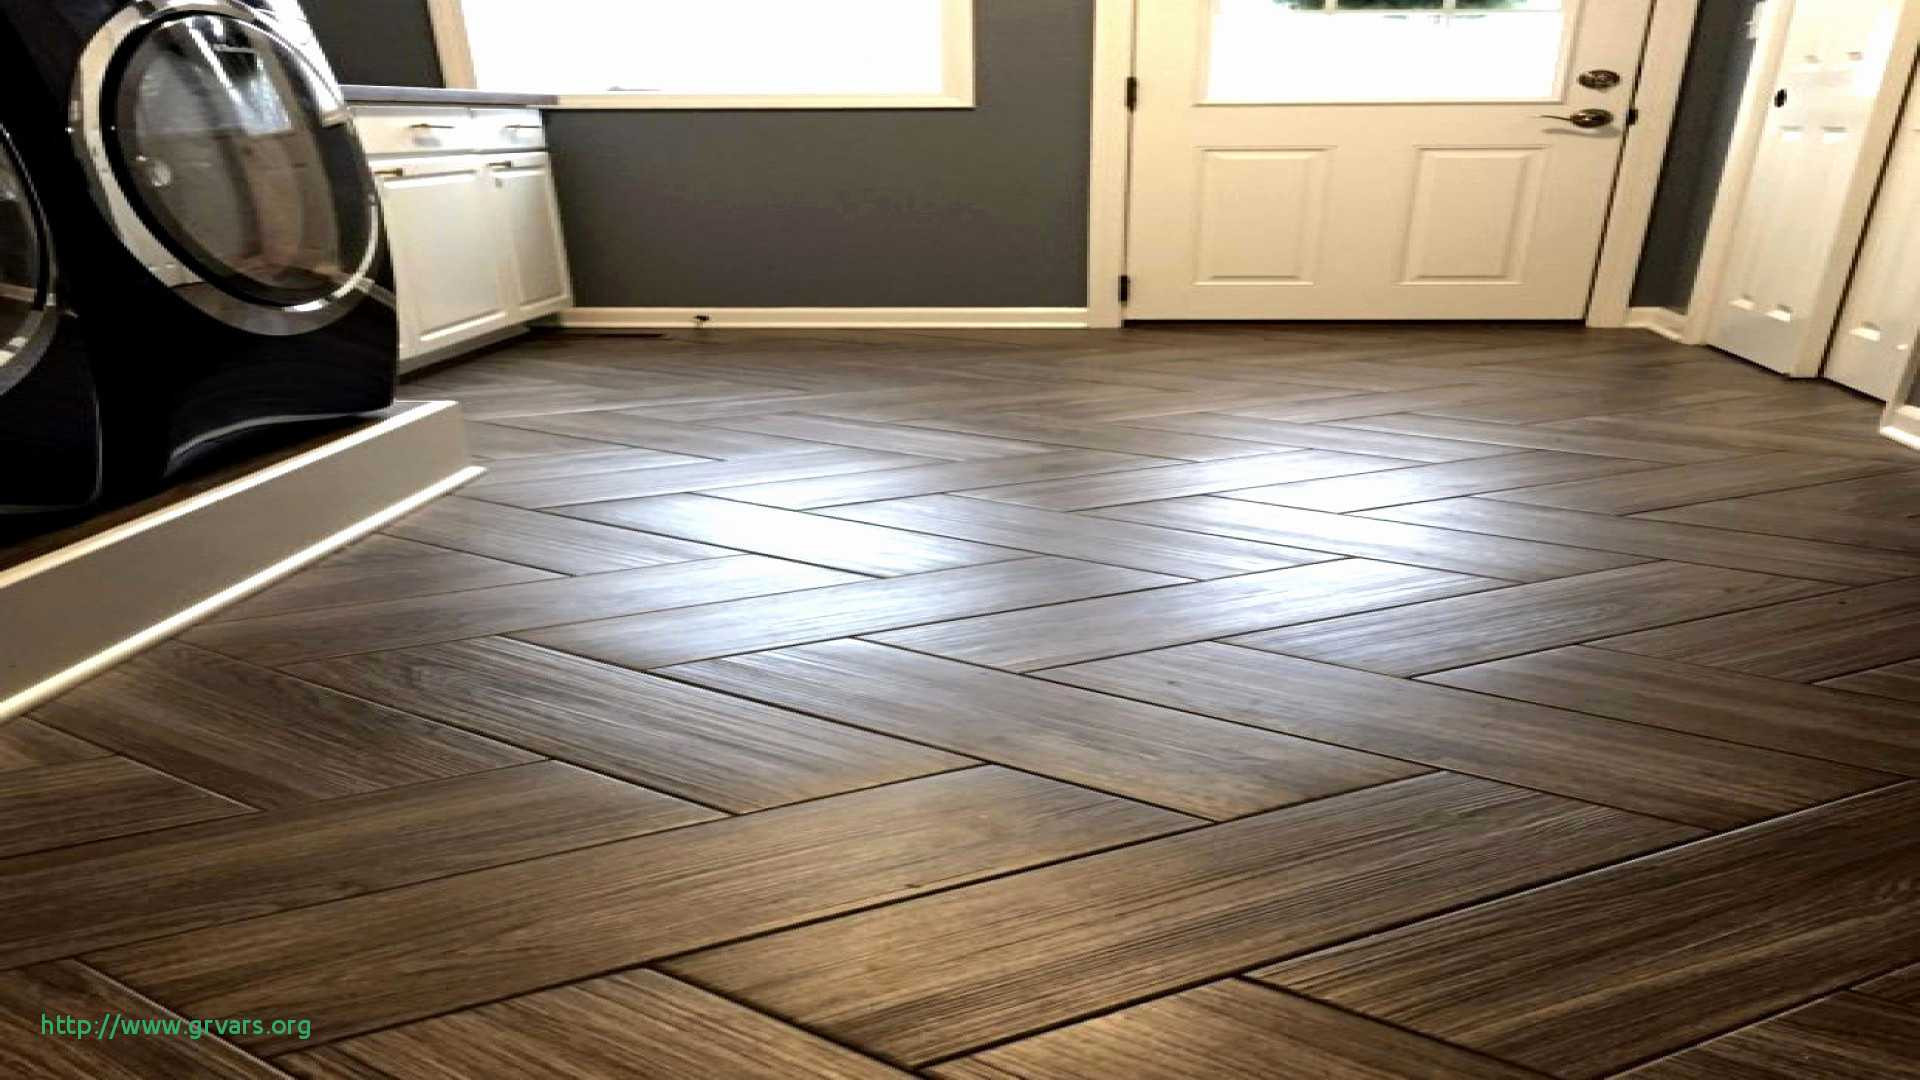 18 Stylish Hardwood Floor Refinishing Buffalo Ny 2024 free download hardwood floor refinishing buffalo ny of 17 luxe how to install a tile floor on concrete ideas blog in kitchen floor tiles home depot elegant s media cache ak0 pinimg 736x 43 0d 97 best